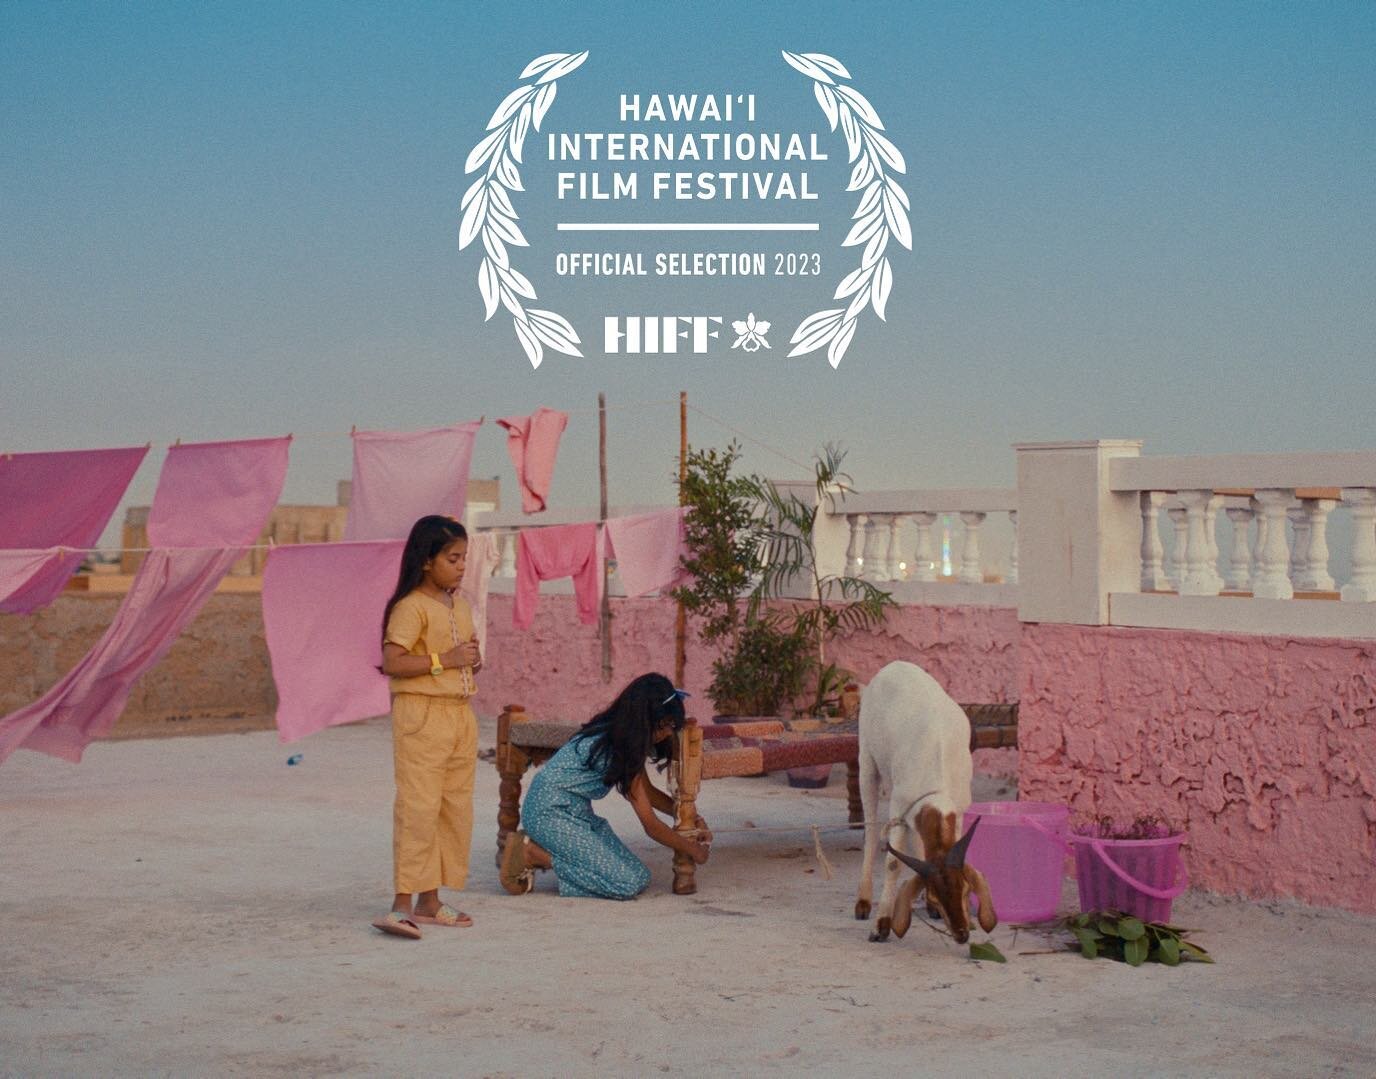 We&rsquo;re so excited to be screening at the Academy Awards&reg; qualifying 43rd Hawaii International Film Festival, the premiere cinematic event in the Pacific. The festival annually attracts more than 50,000 film enthusiasts, and is heralded as &l